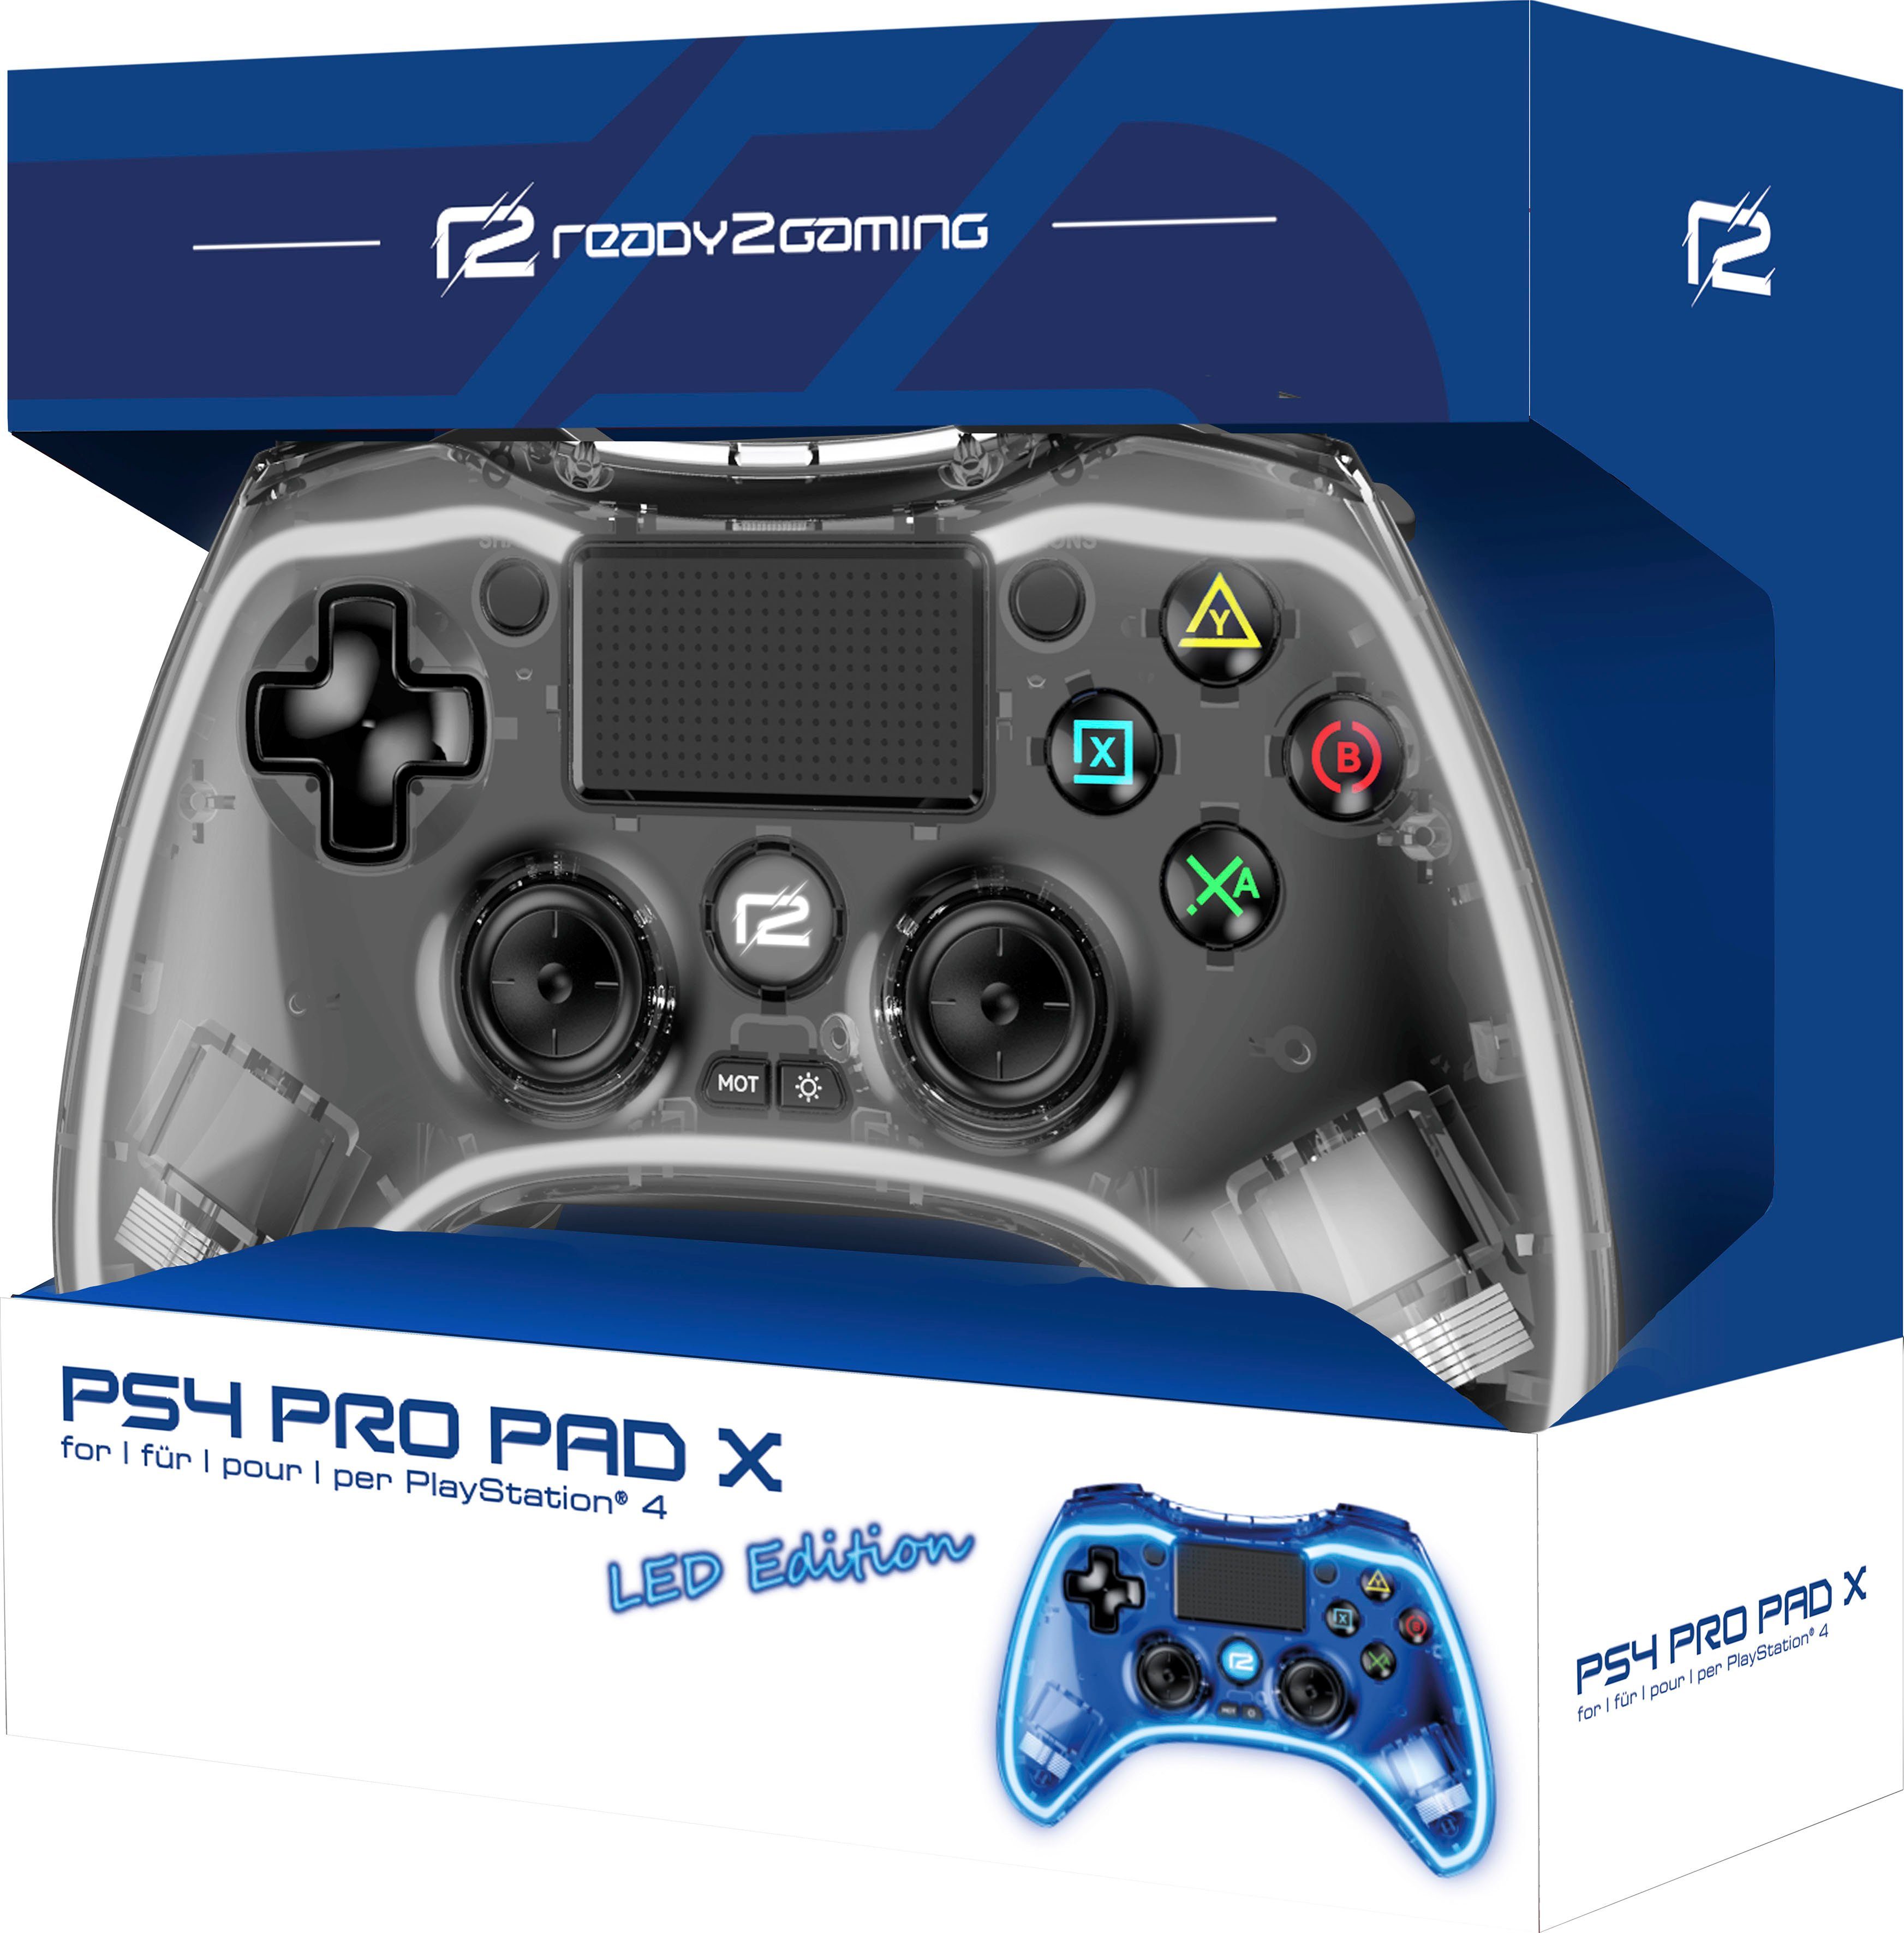 Ready2gaming PS4 Pro Pad mit Led Controller Beleuchtung X Edition blauer LED transparent